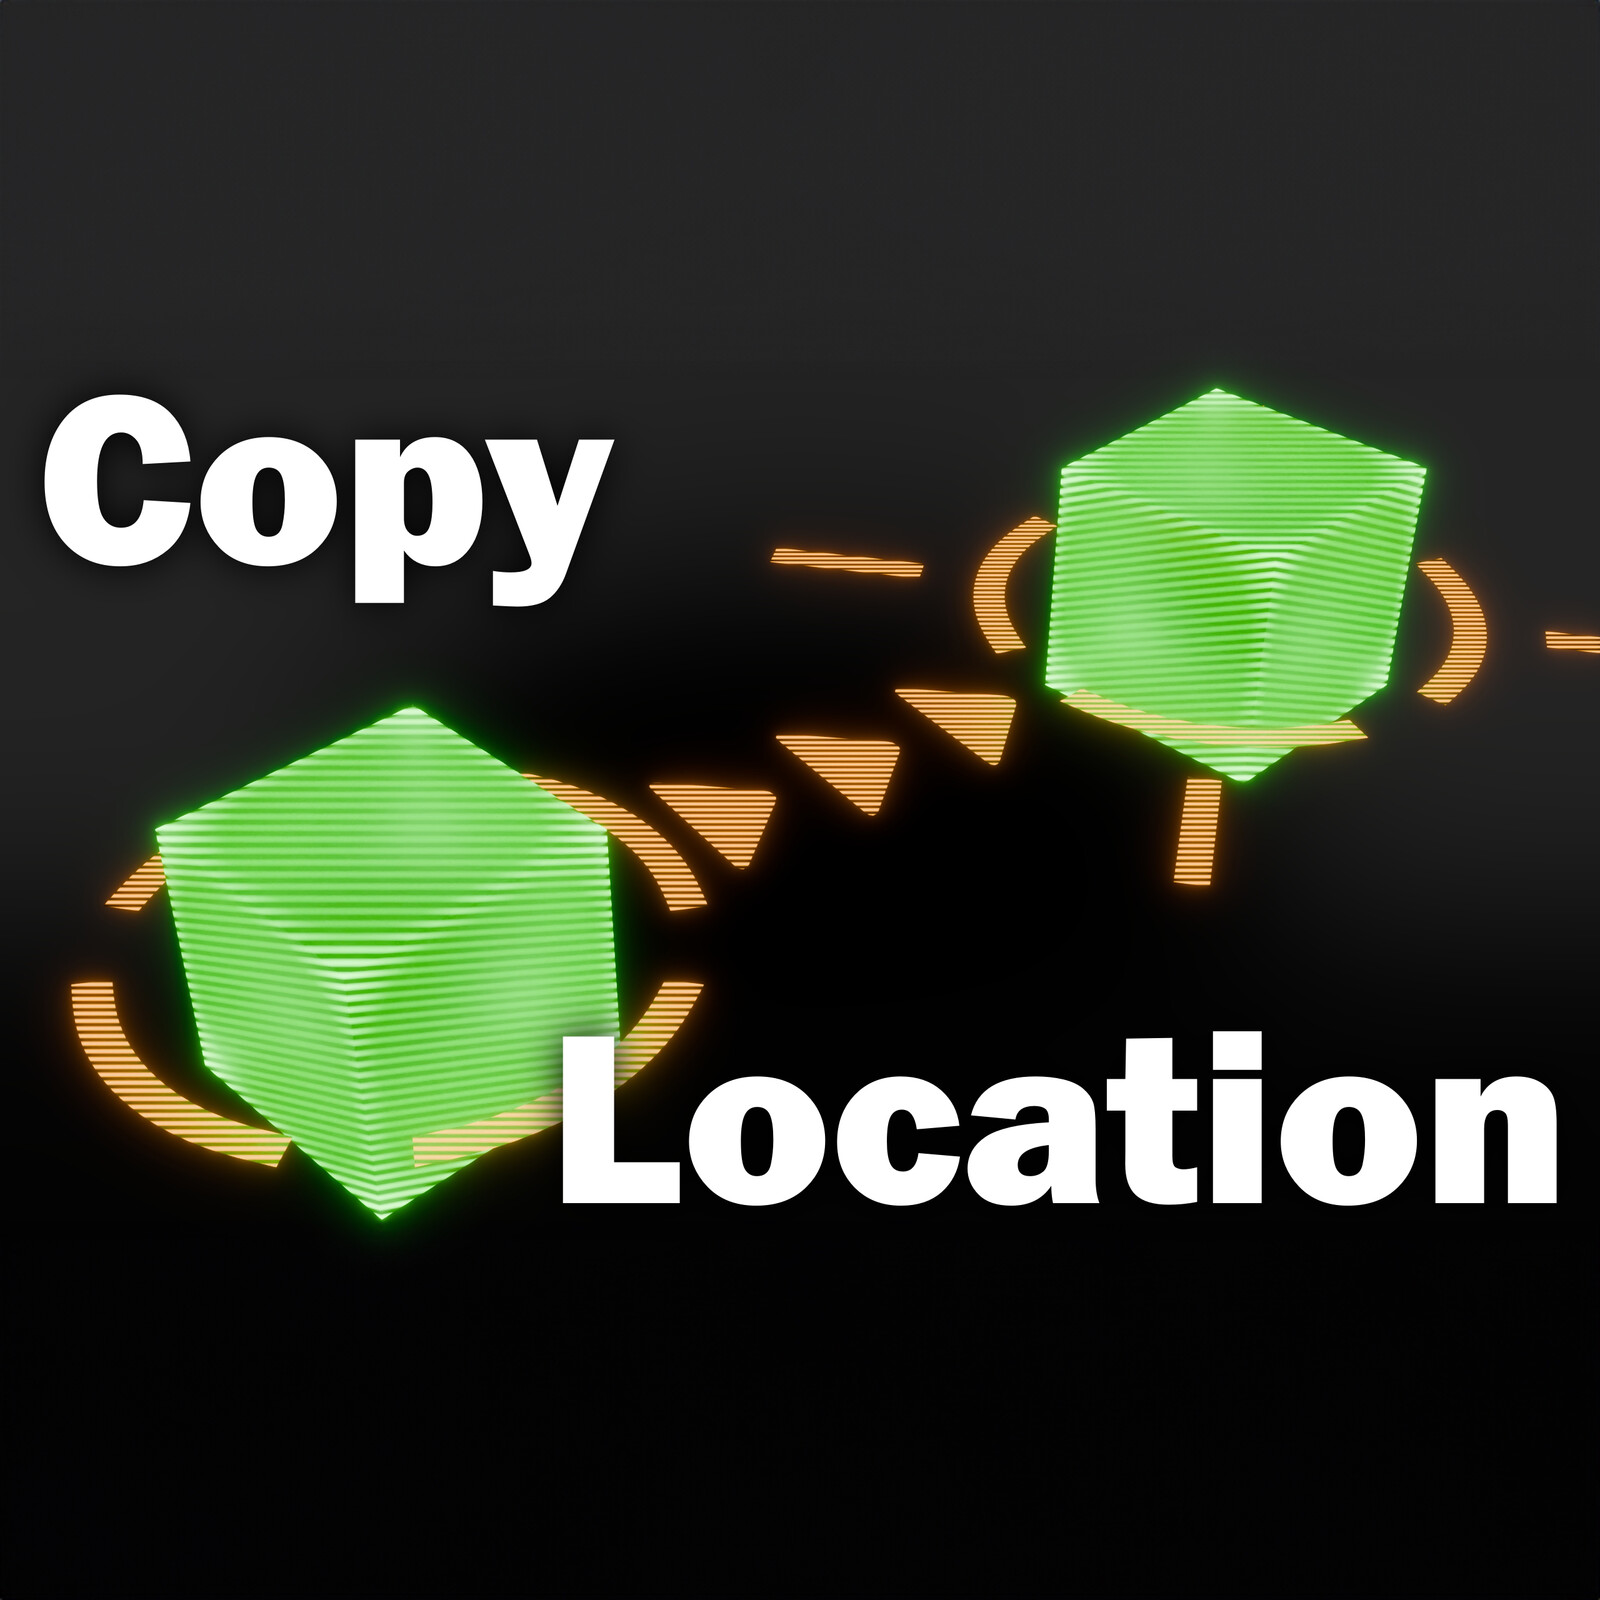 Copy One Object's Location to Another in Blender